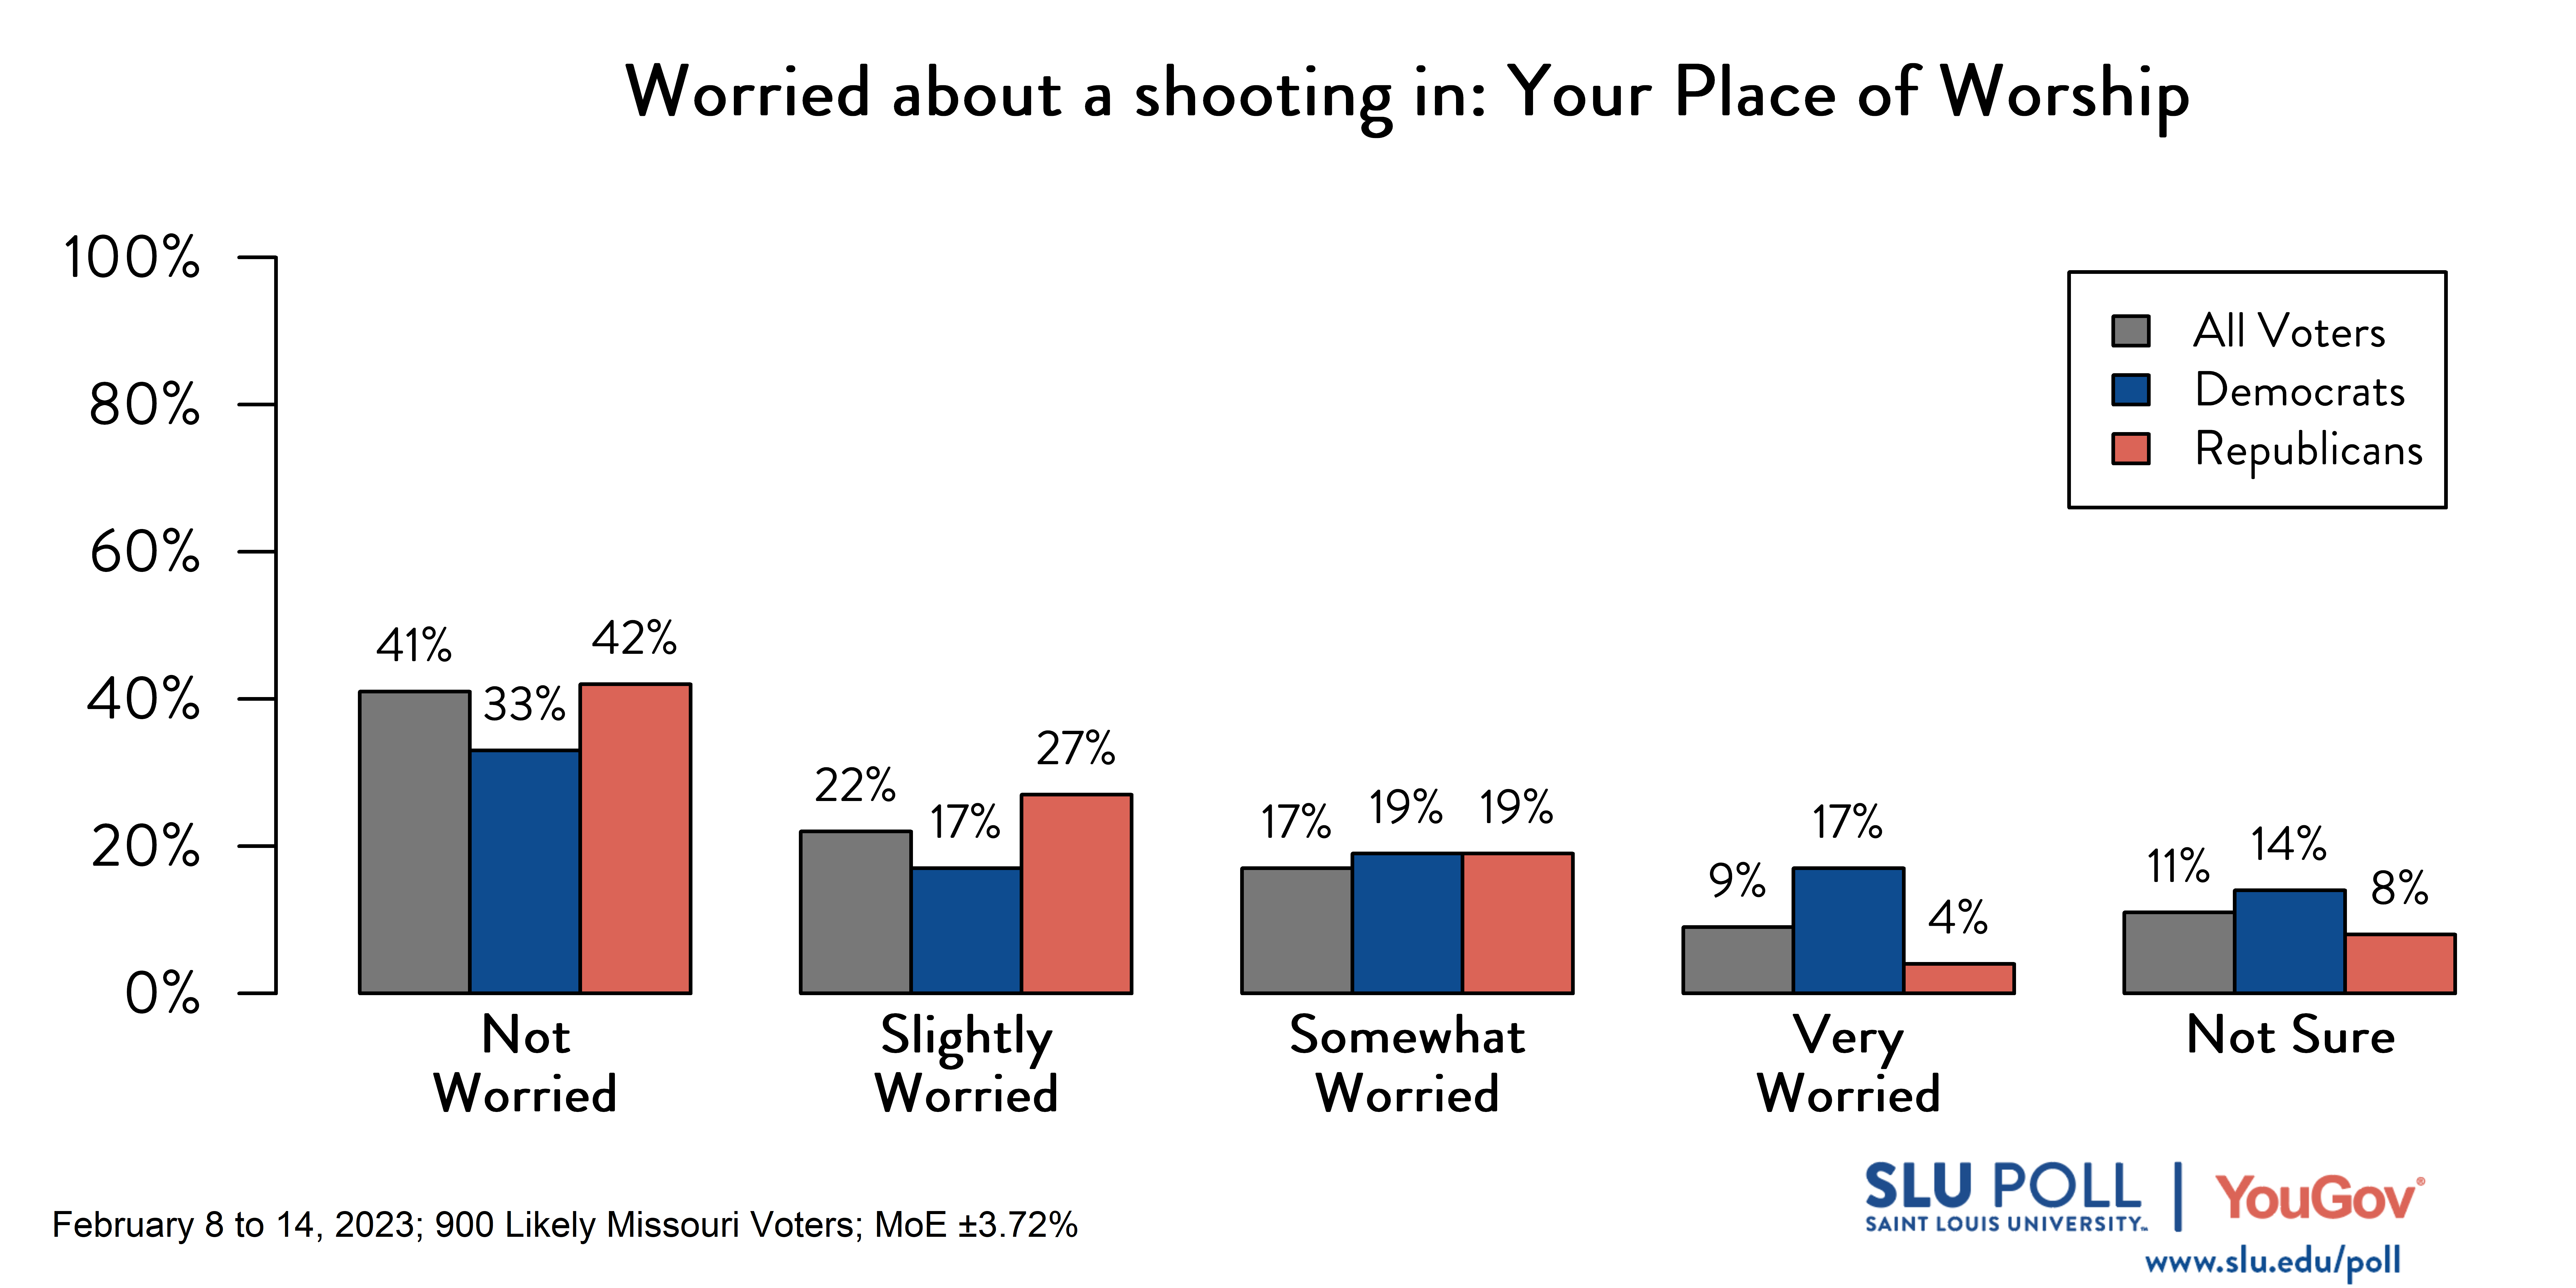 Likely voters' responses to 'How worried are you about the possibility of a shooting ever happening: at your place of worship?': 41% Not worried, 22% Slightly worried, 17% Somewhat worried, 9% Very worried, and 11% Not sure. Democratic voters' responses: ' 33% Not worried, 17% Slightly worried, 19% Somewhat worried, 17% Very worried, and 14% Not sure. Republican voters' responses: 42% Not worried, 27% Slightly worried, 19% Somewhat worried, 4% Very worried, and 8% Not sure.